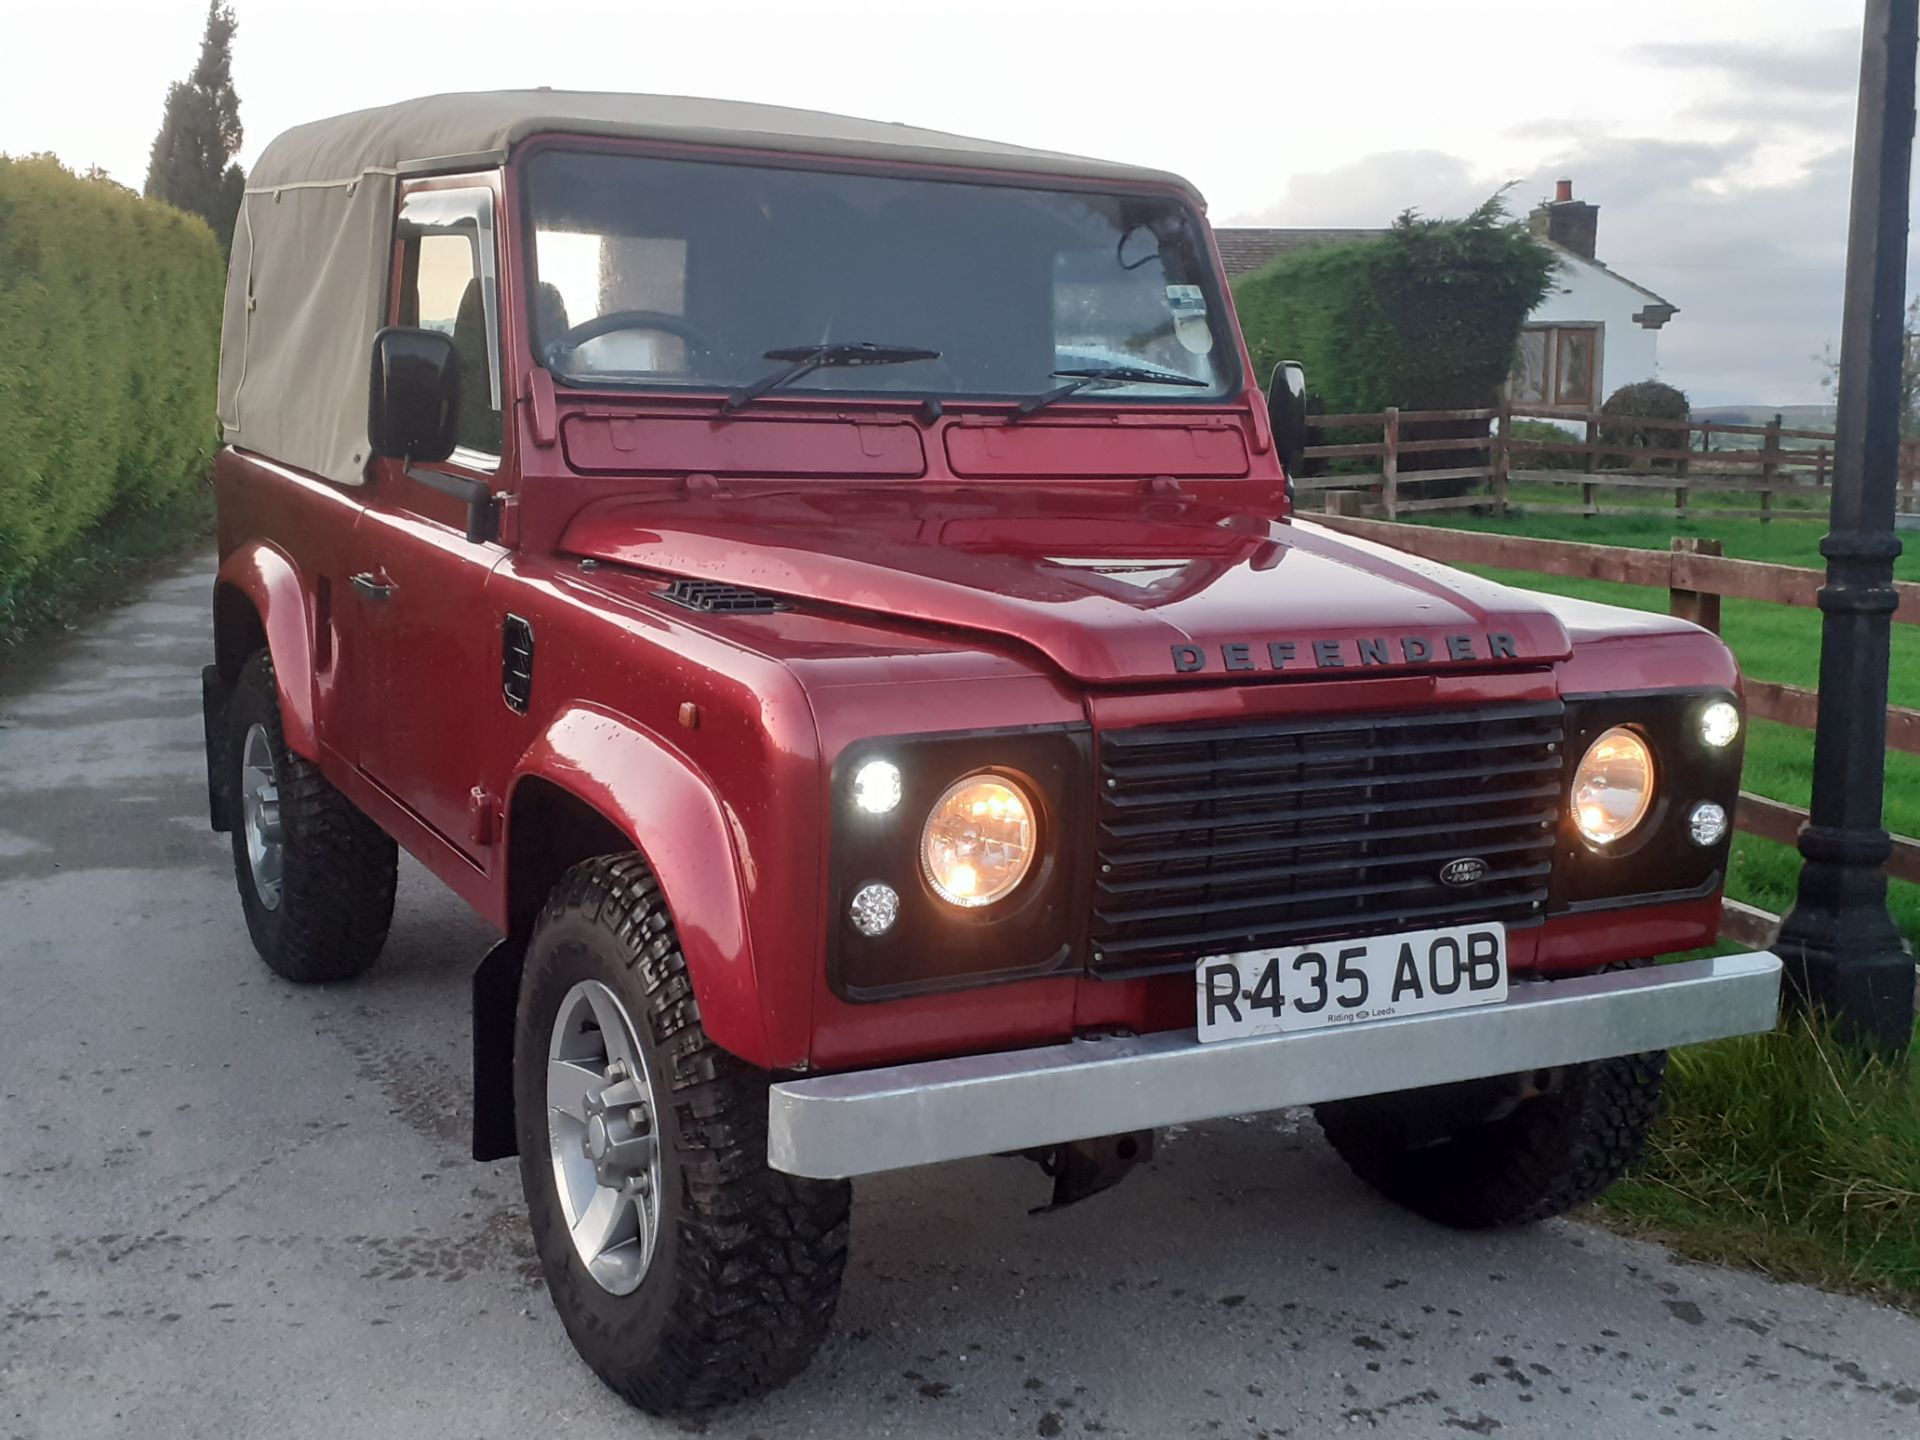 1998/R REG LAND ROVER DEFENDER 90 CSW TDI 95 RED CONVERTIBLE 6 SEATER, SHOWING 2 FORMER KEEPERS - Image 3 of 9